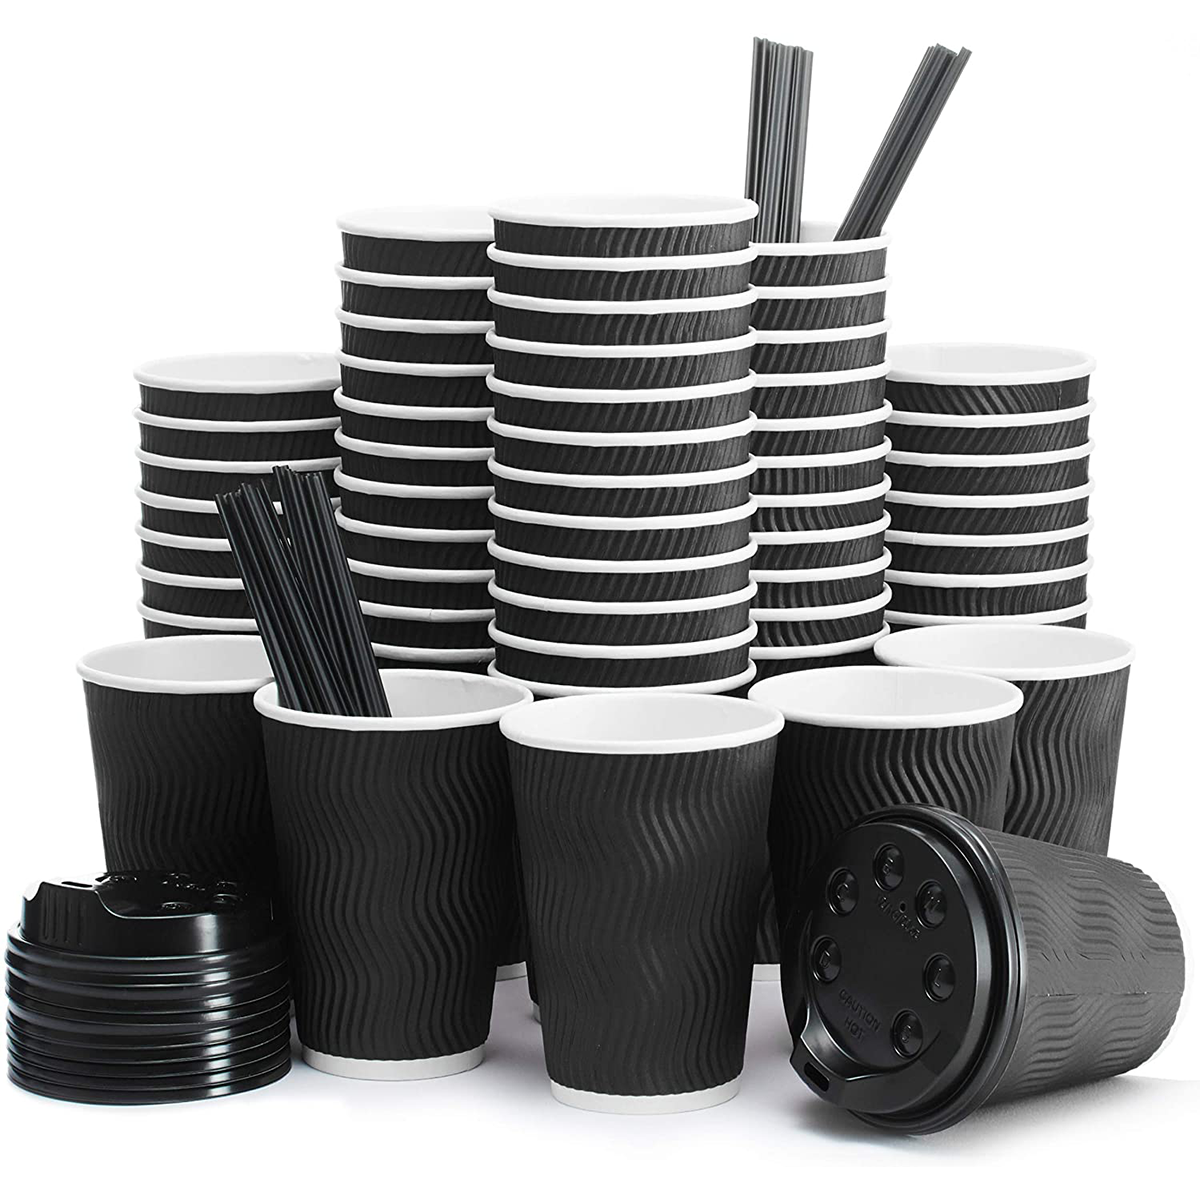 https://www.tuobopackageing.com/ripple-wall-paper-coffee-cups-custom-design-for-hot-dlinks-product/